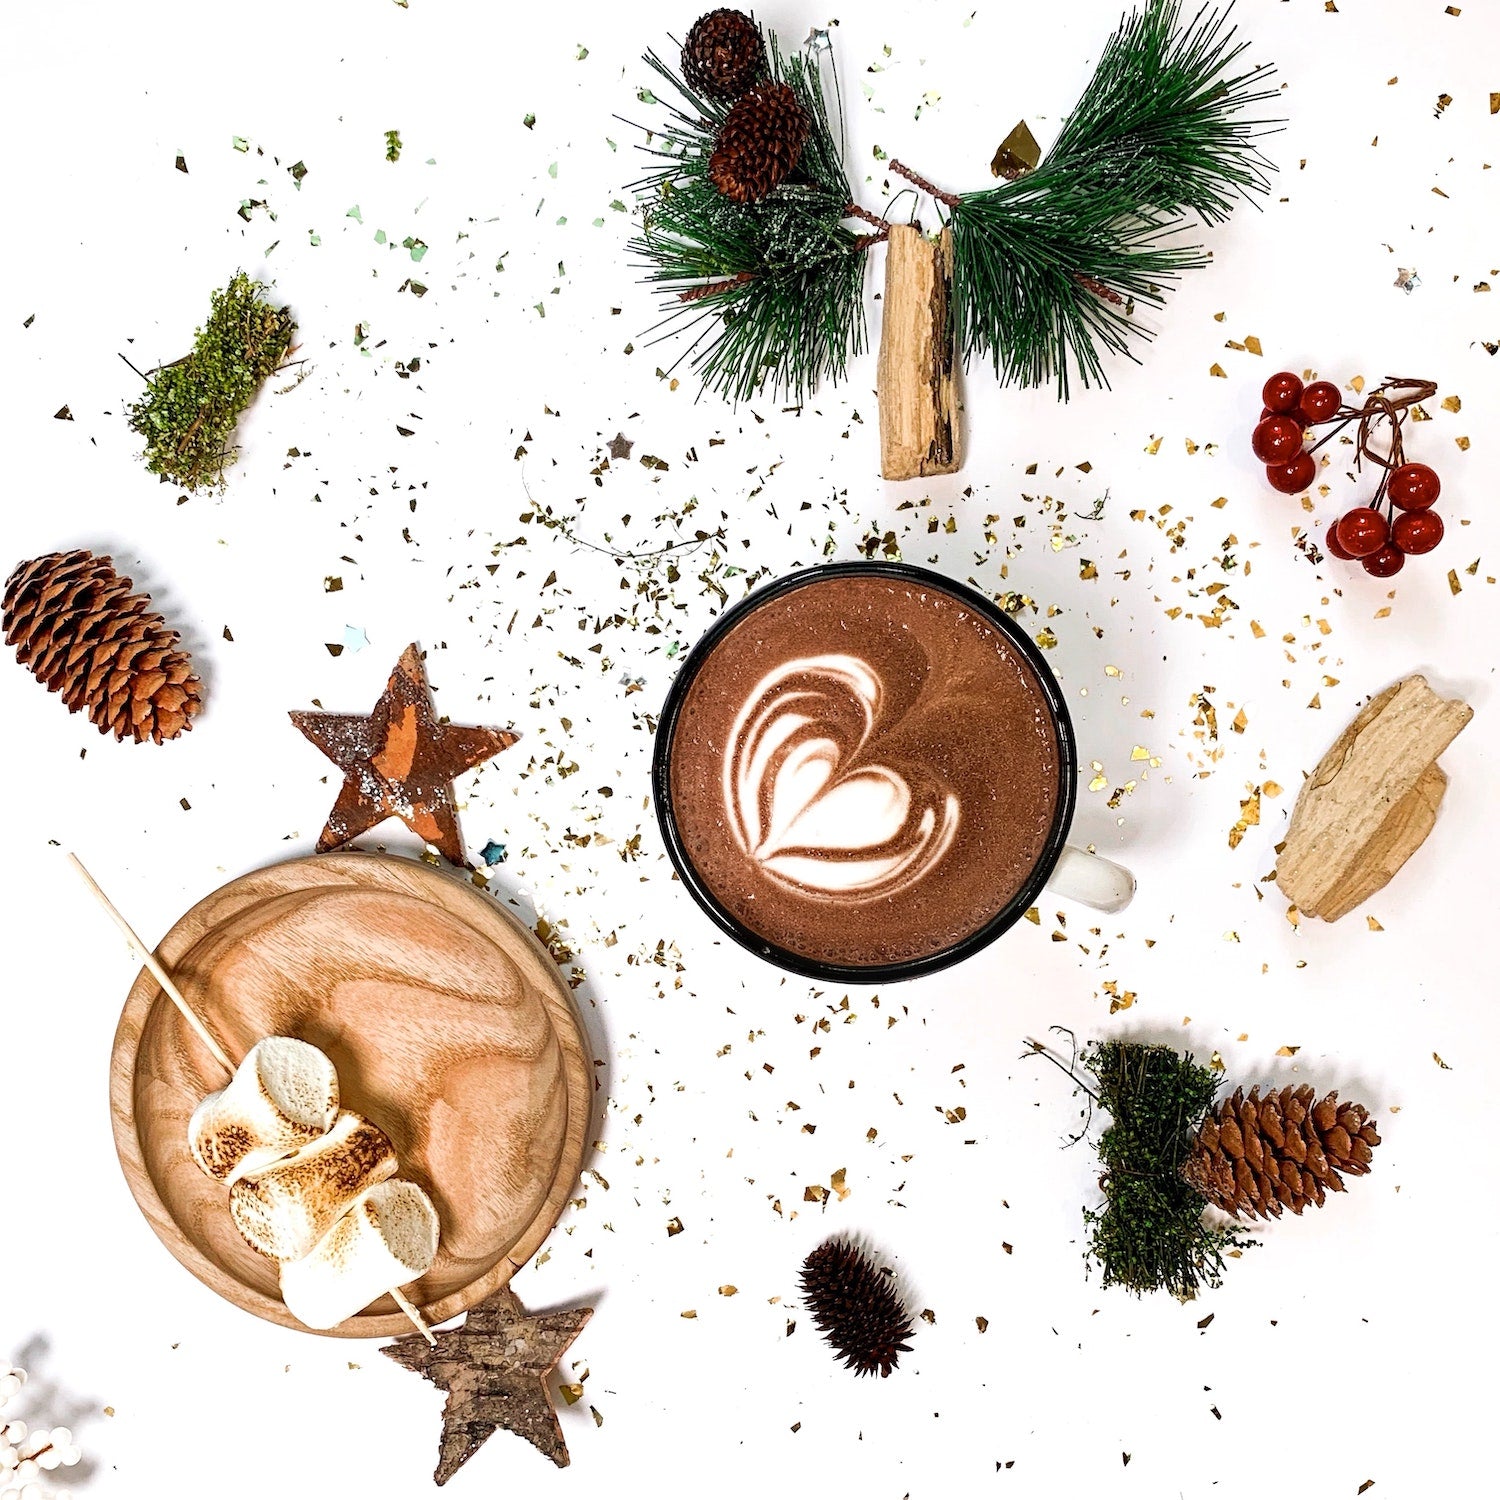 6 AMAZING Holiday Food and Drink Recipes You’ll Want to Try